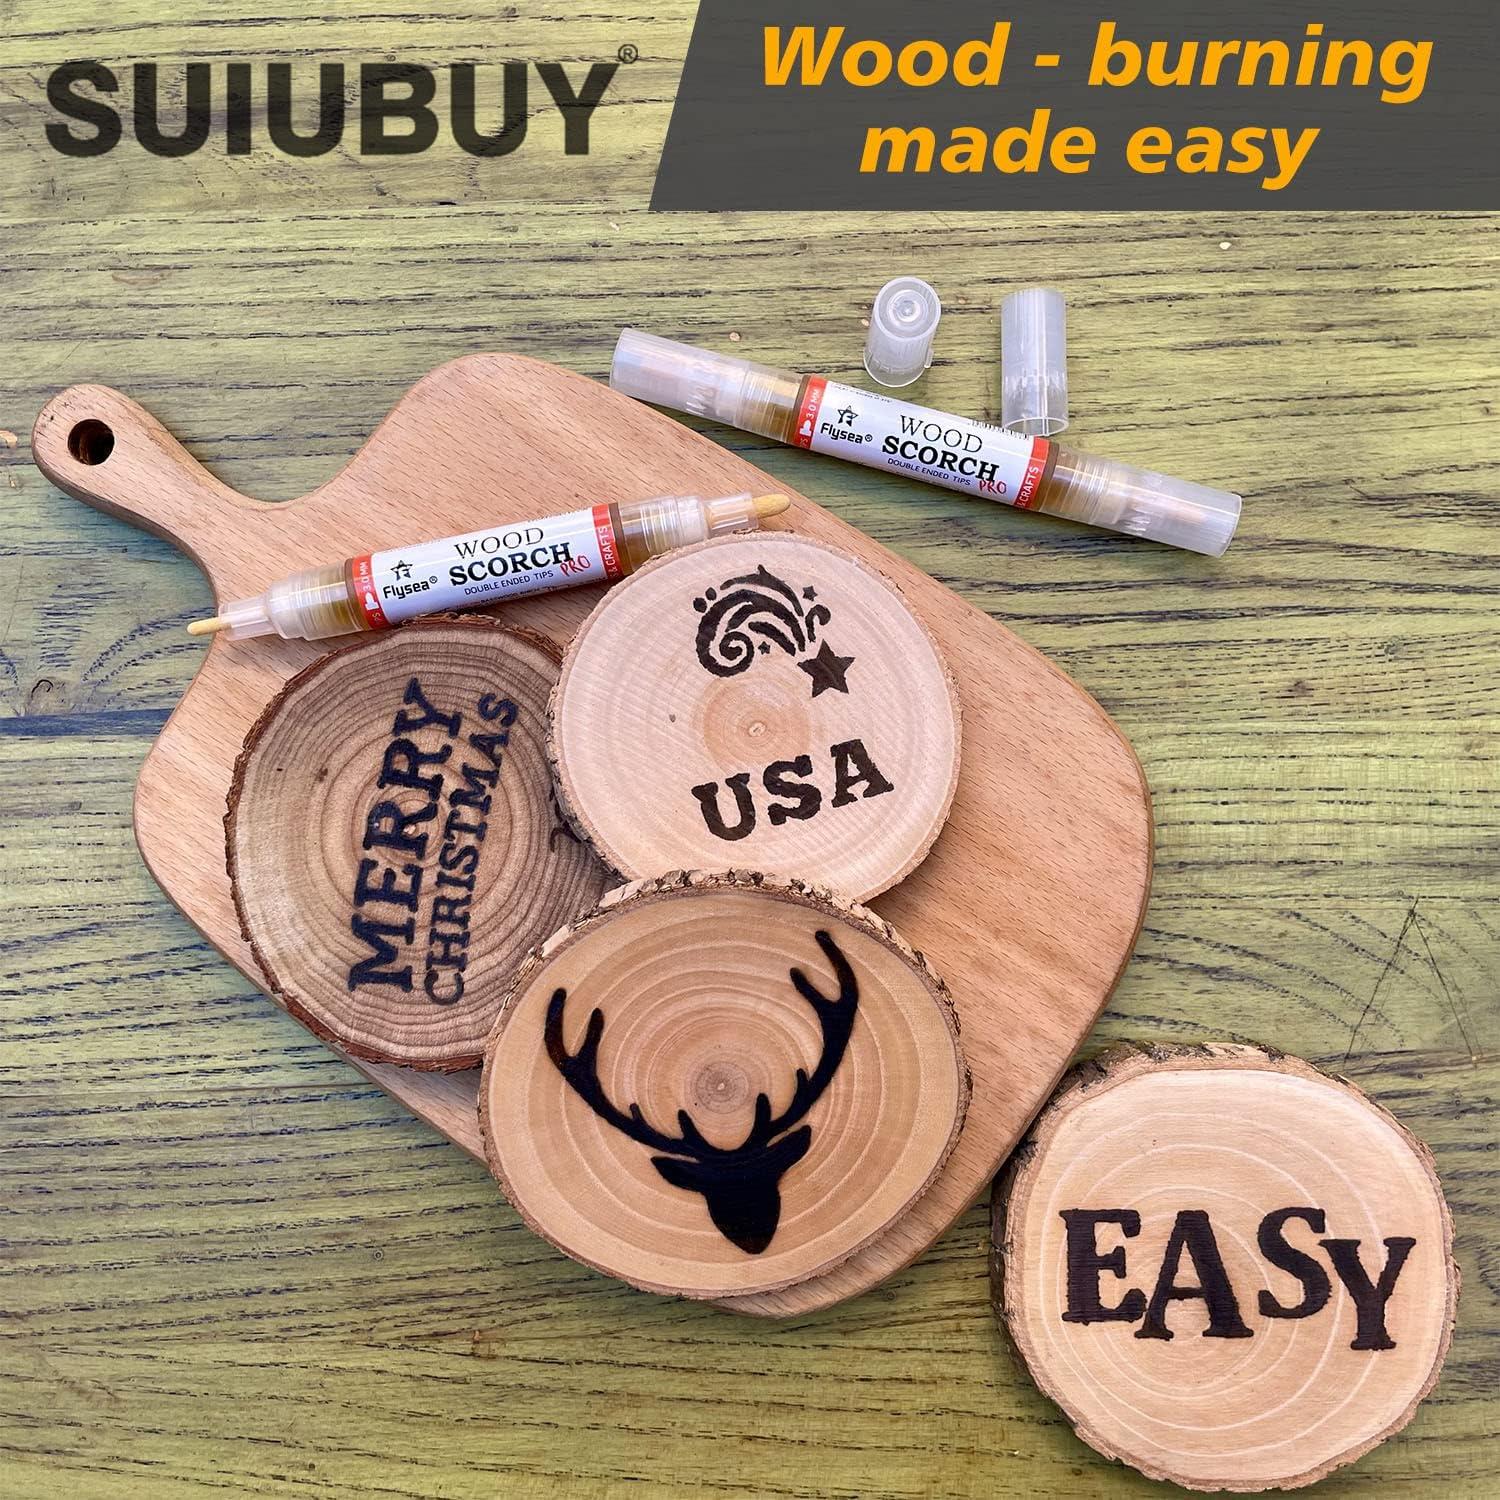  Wood Burning Pen, 3PC Scorch Pen Scorch Markers for Wood, Wood  Burning Kit Scortch Pen for Artists and Beginners in DIY Wood Projects -  Easy Use & Holiday Decoration #